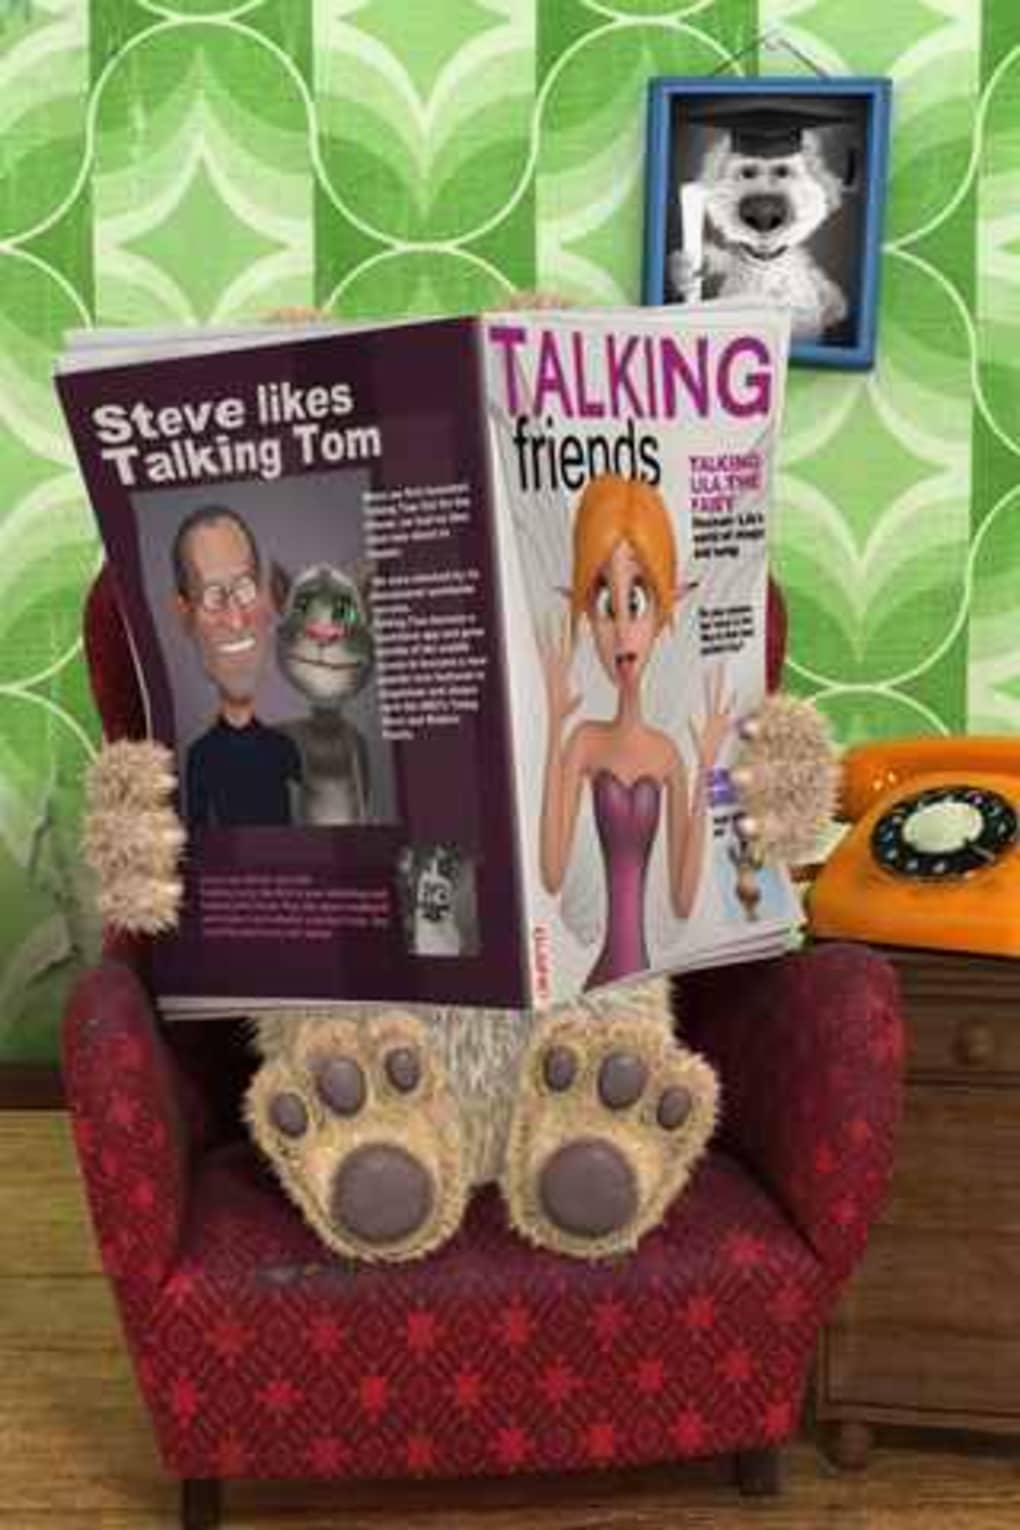 Free Talking Ben the Dog for iPad Software Download